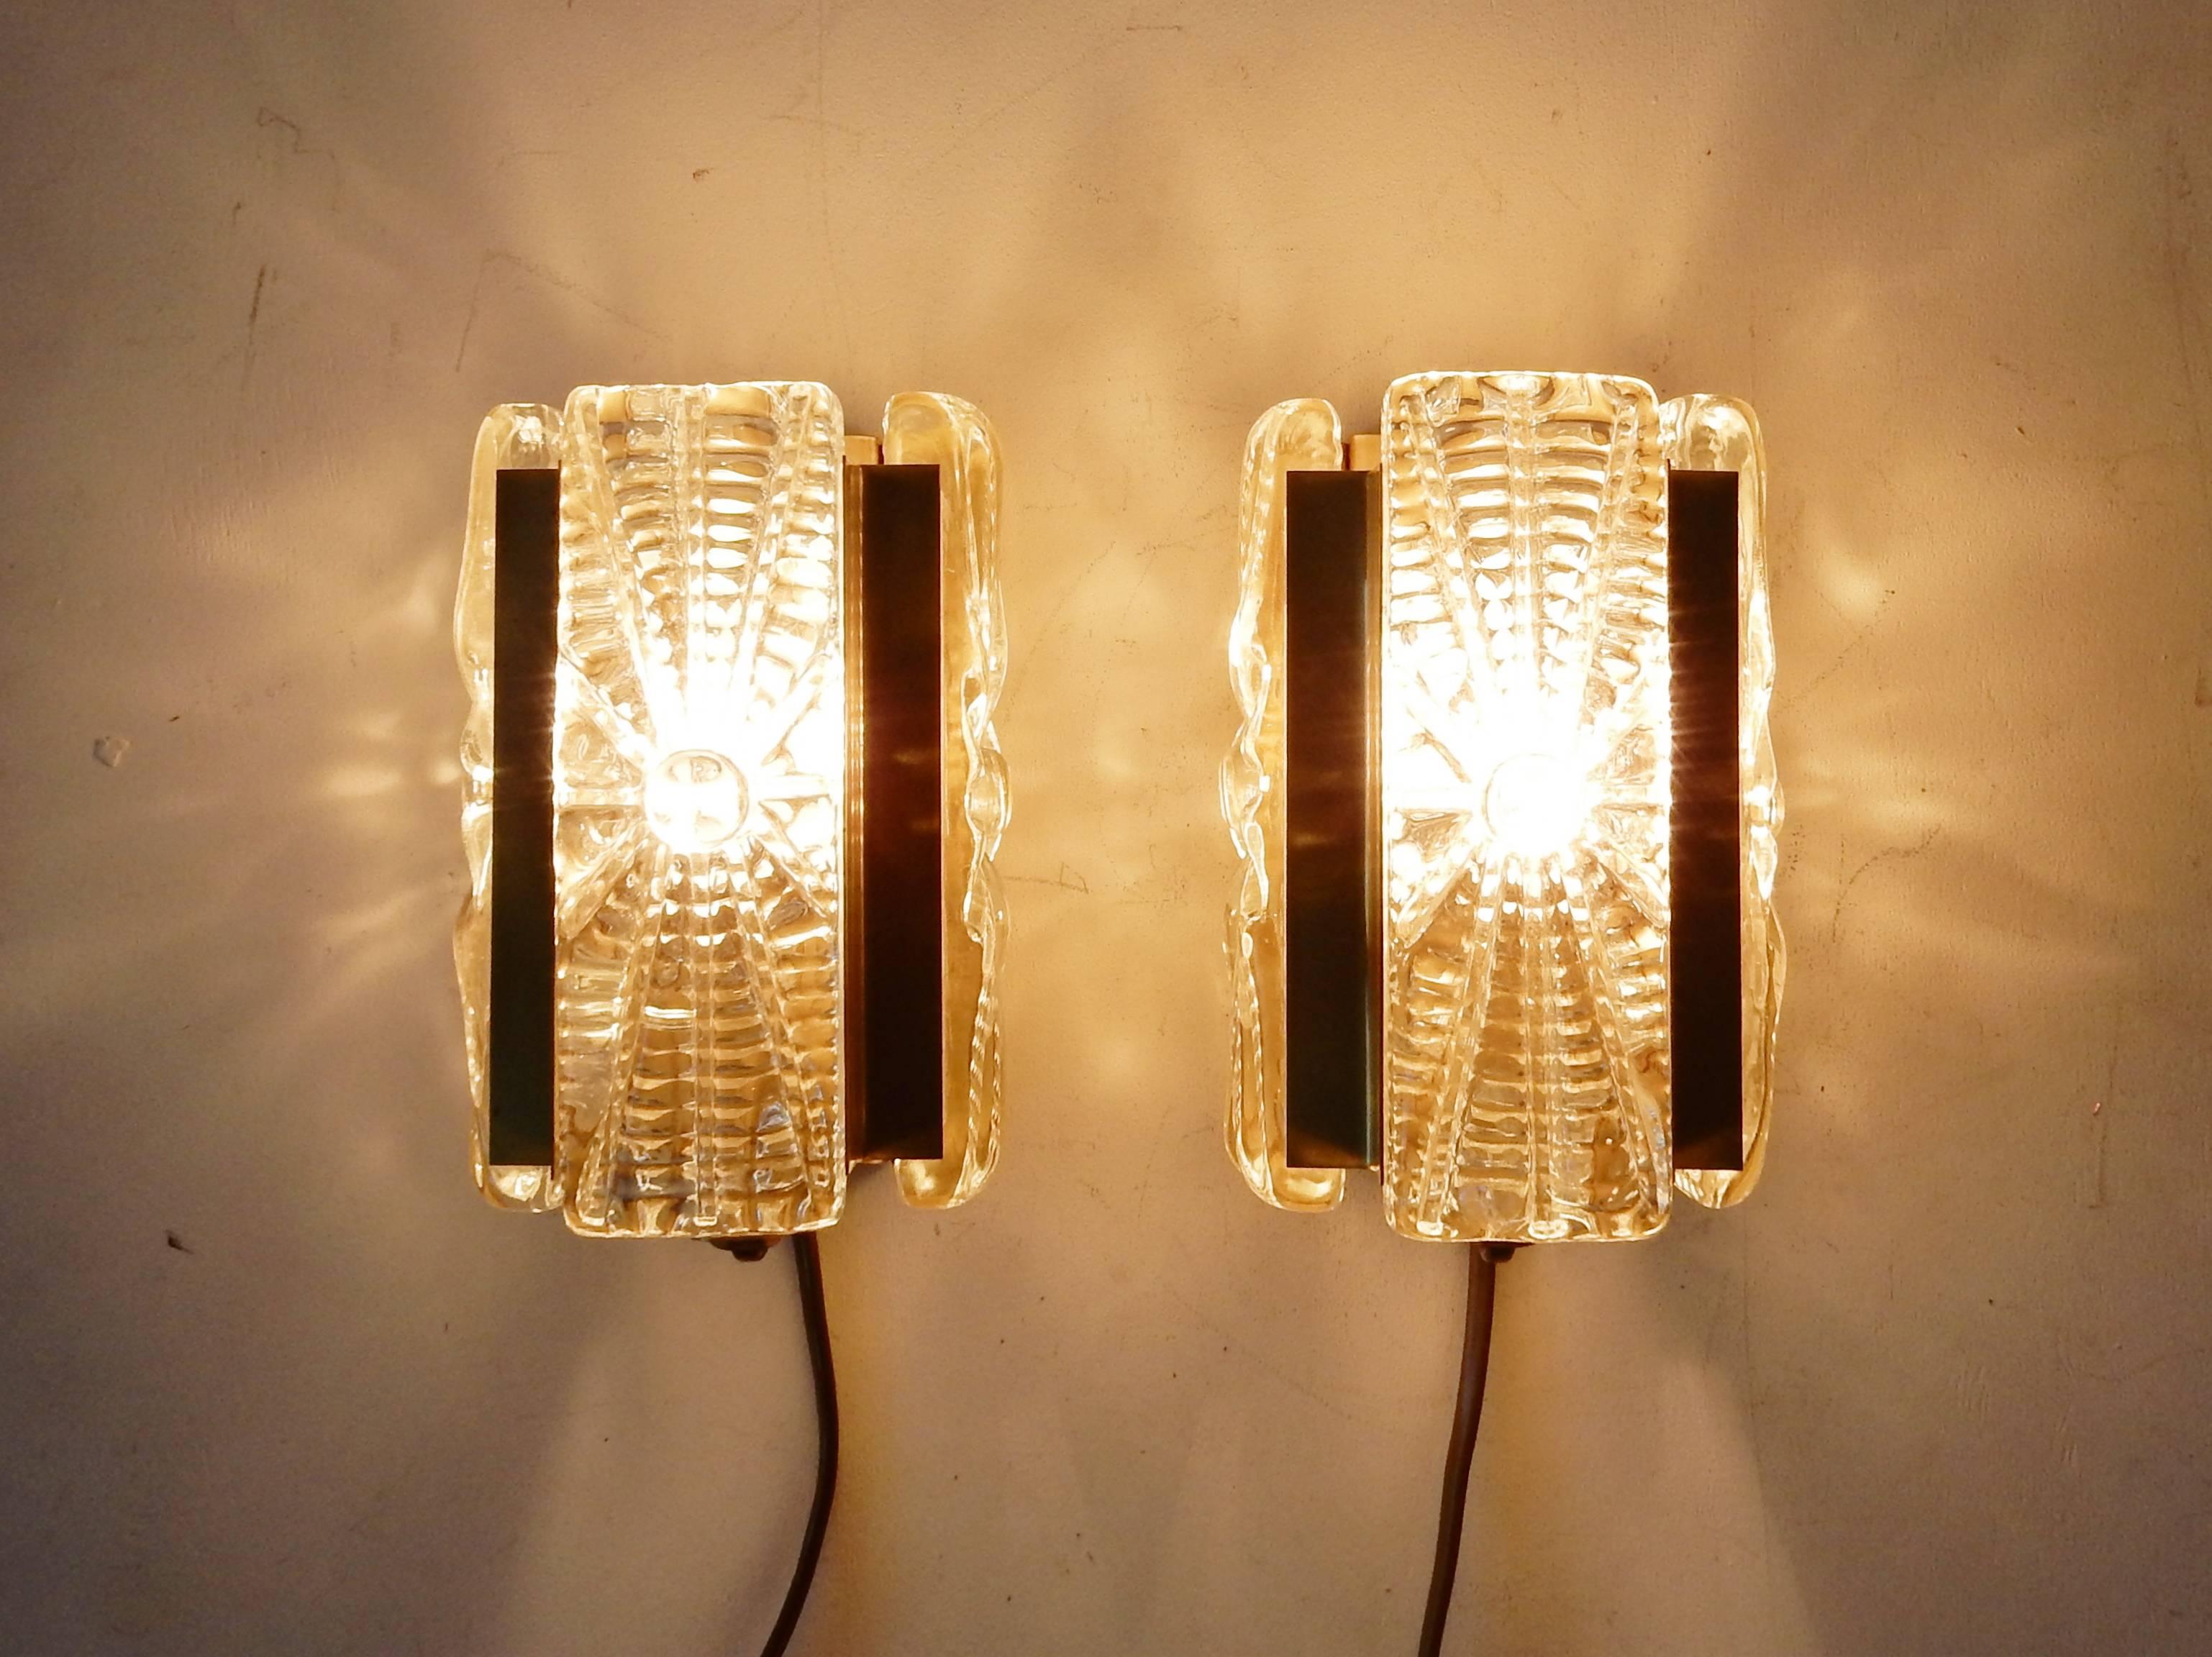 This set of two wall lamps are of a gold colored metal fixture with three thick decorated glass parts. 
Both lights are in very good condition with minor signs of age and use. Both are labelled on the back.